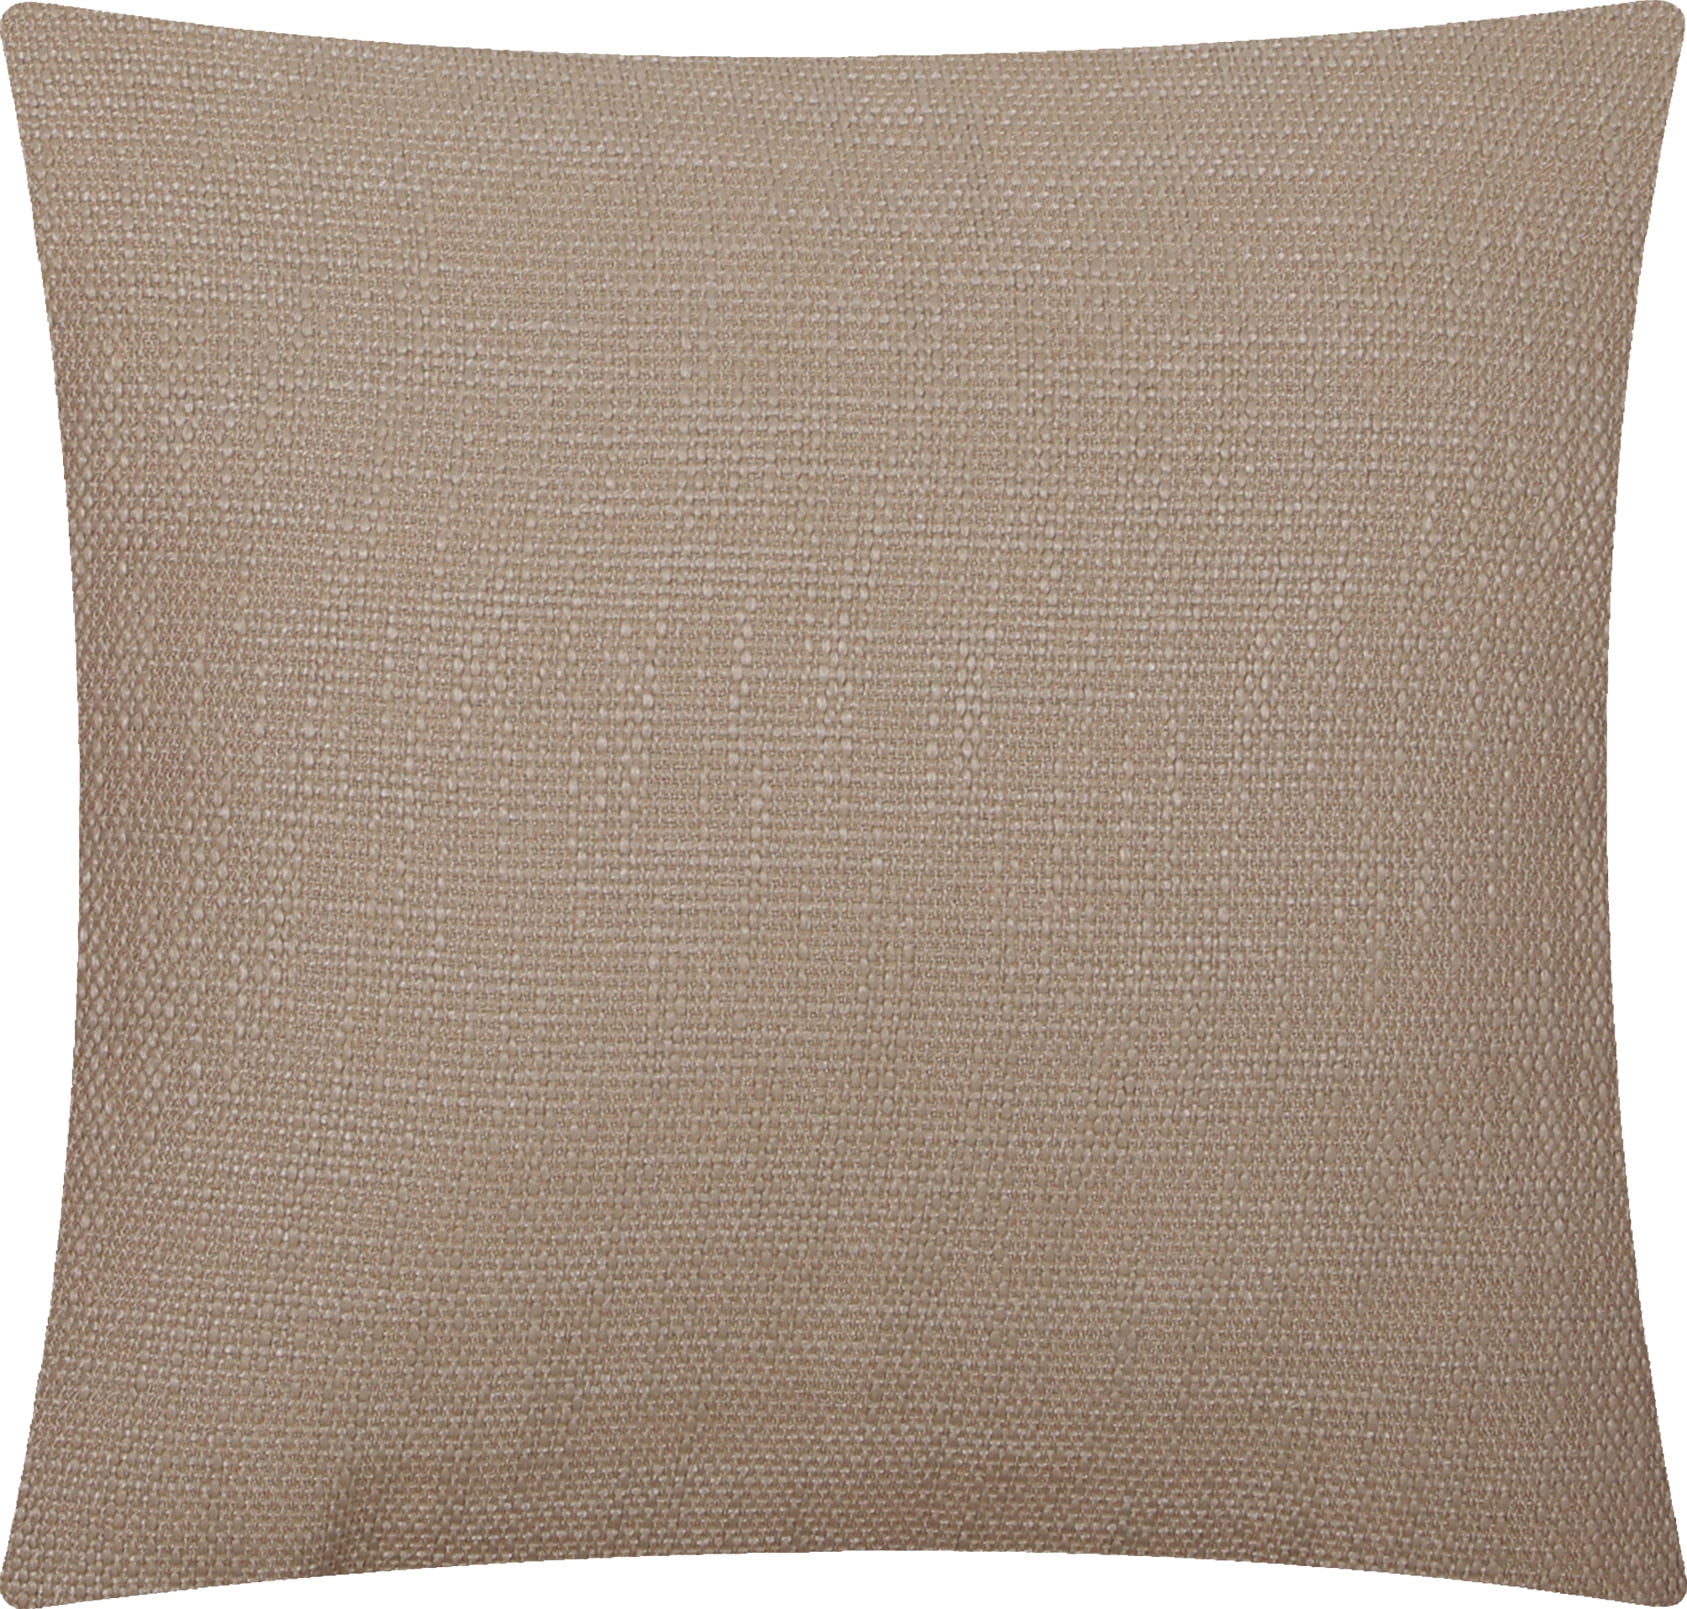 Mainstays Solid Texture Polyester Square Decorative Throw Pillow, 18" x 18", Tan